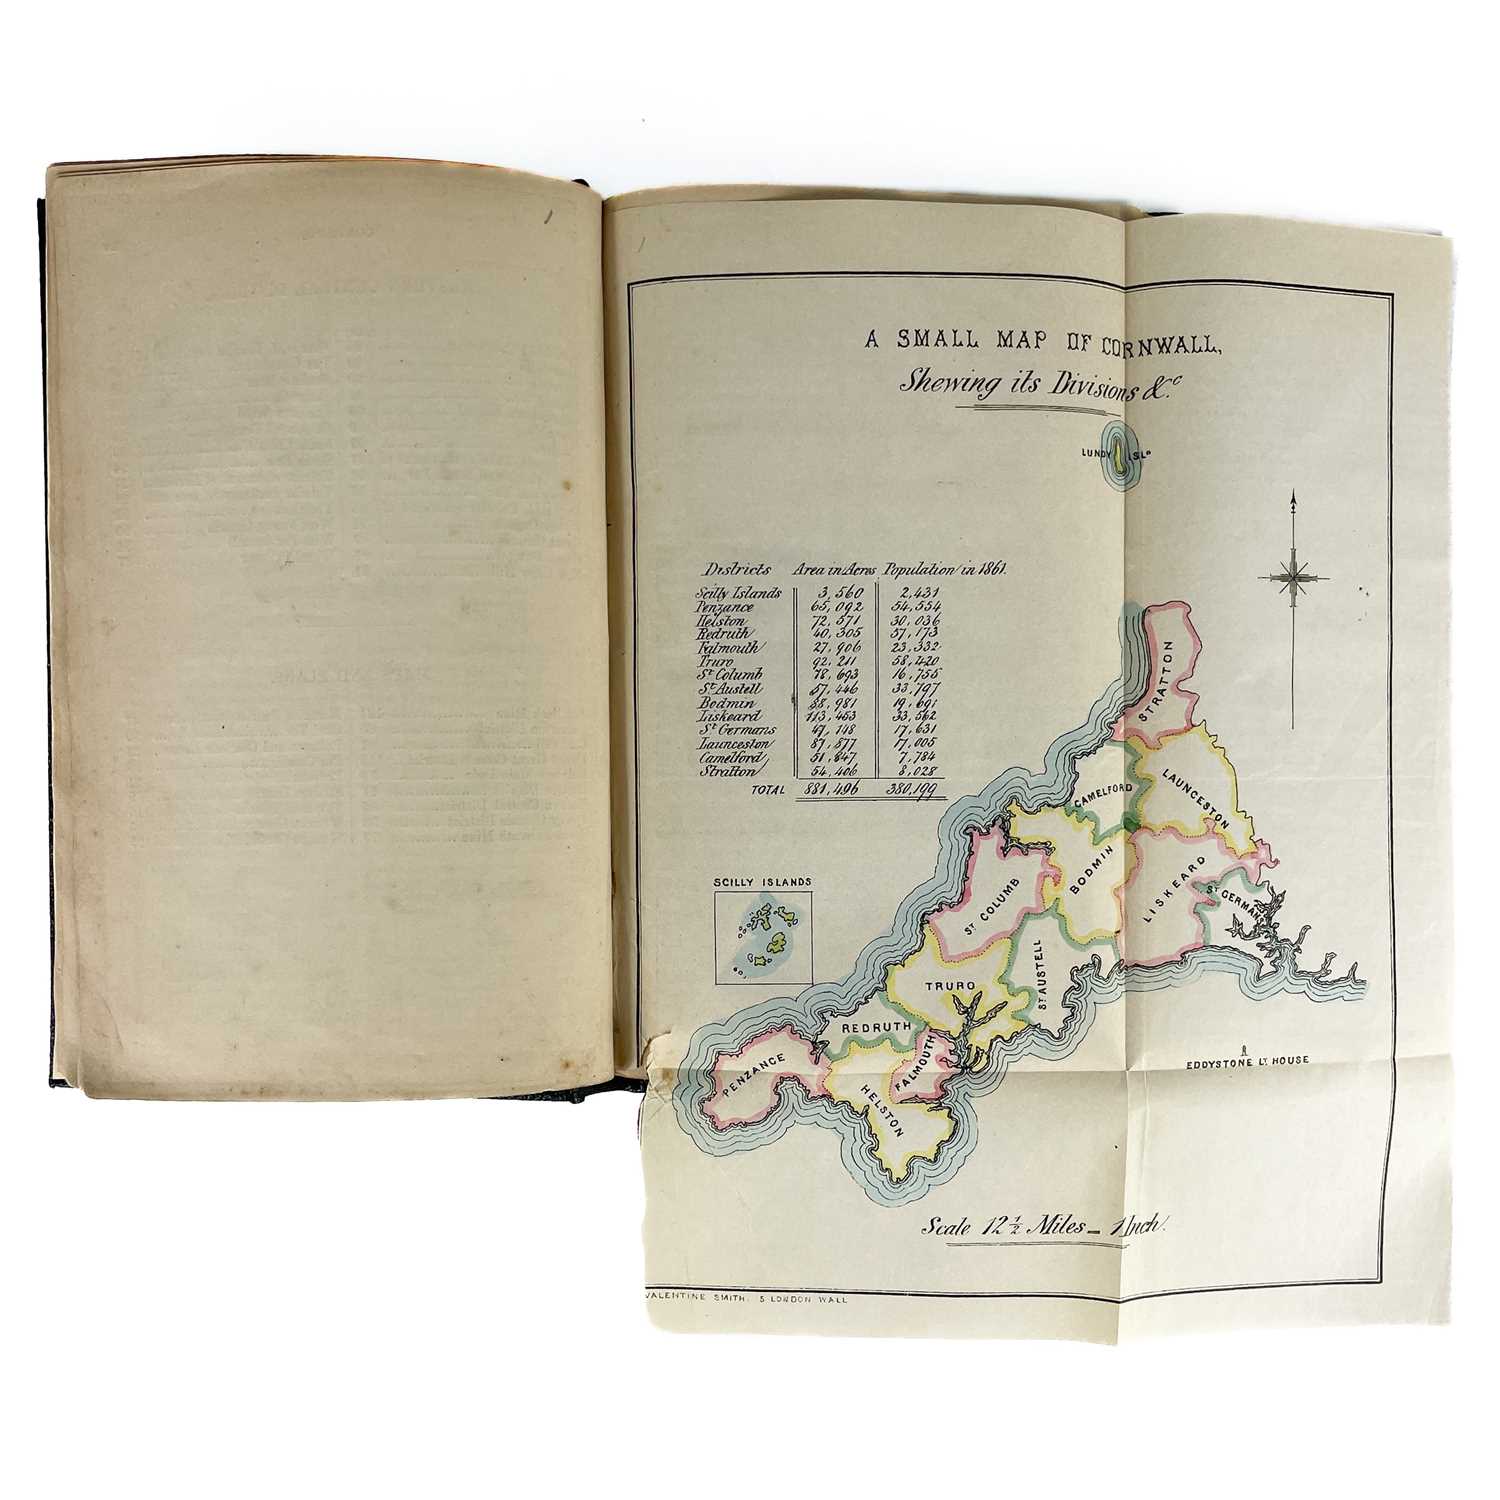 Thomas Spargo. 'Statistics and Observations on the Mines of Cornwall and Devon,' - Image 6 of 9